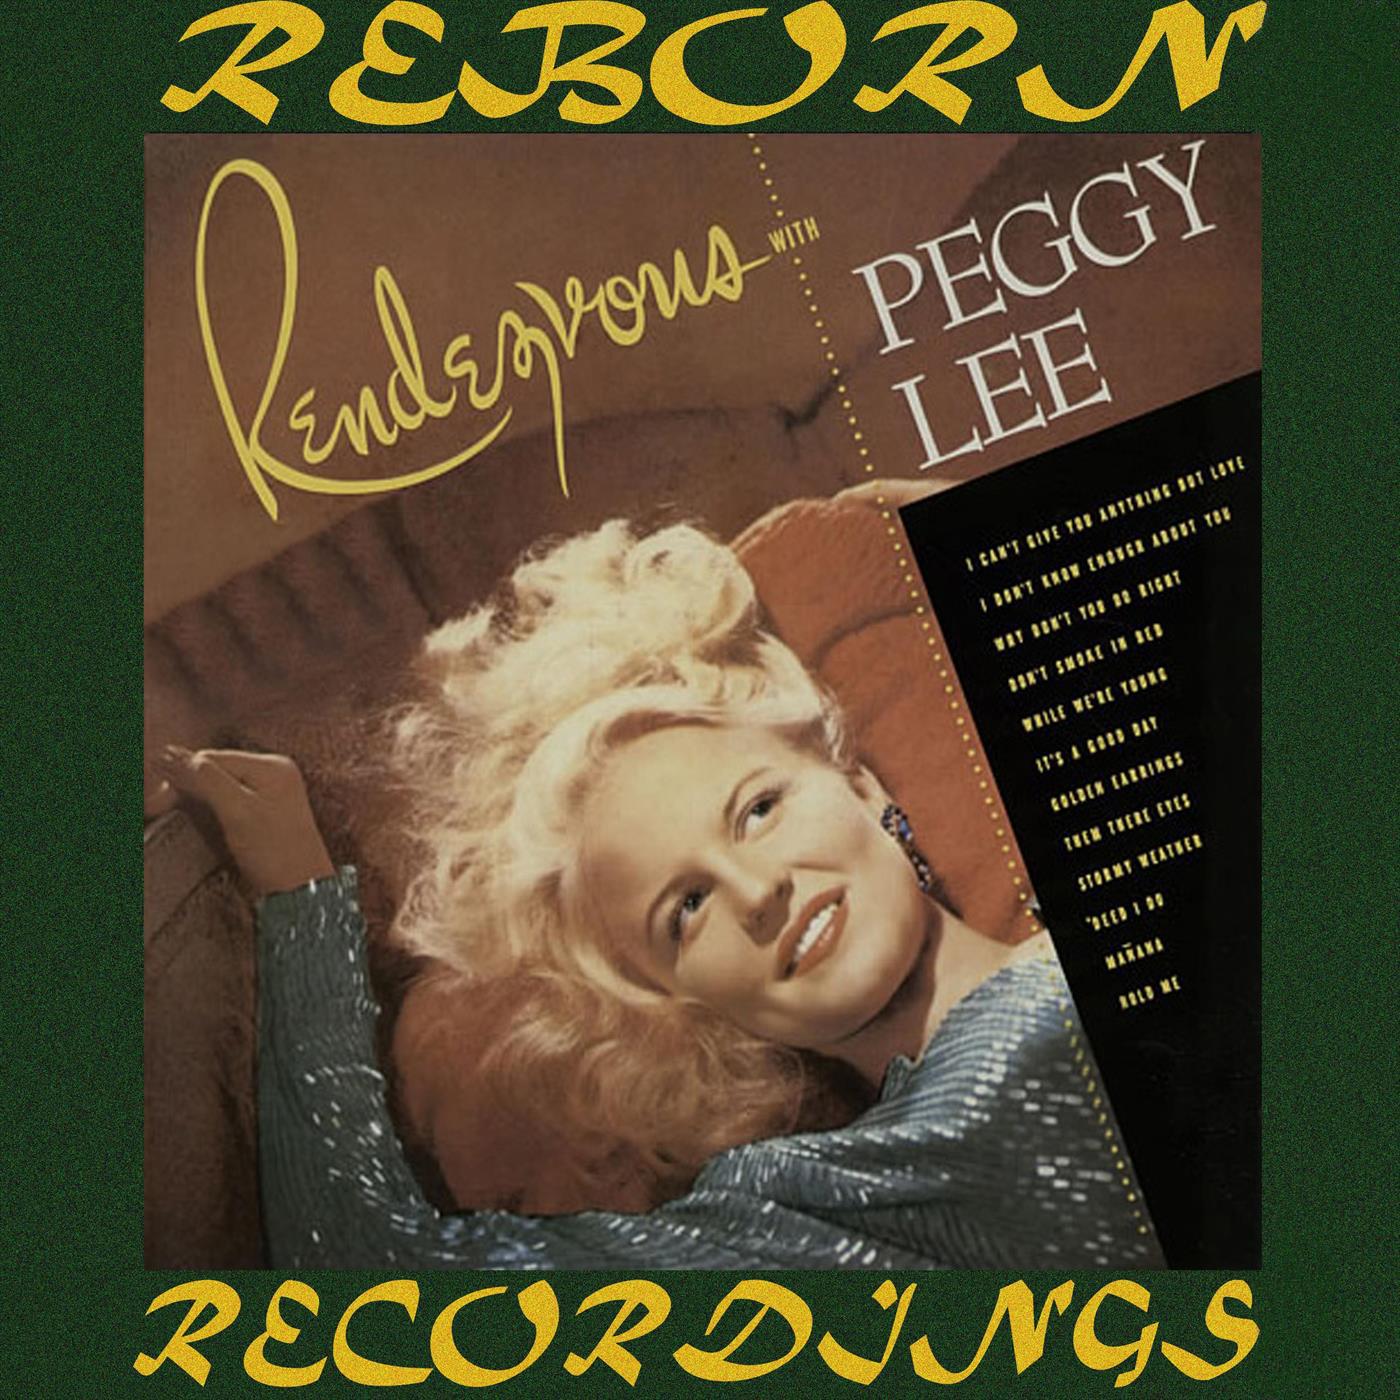 Rendezvous with Peggy Lee (HD Remastered)